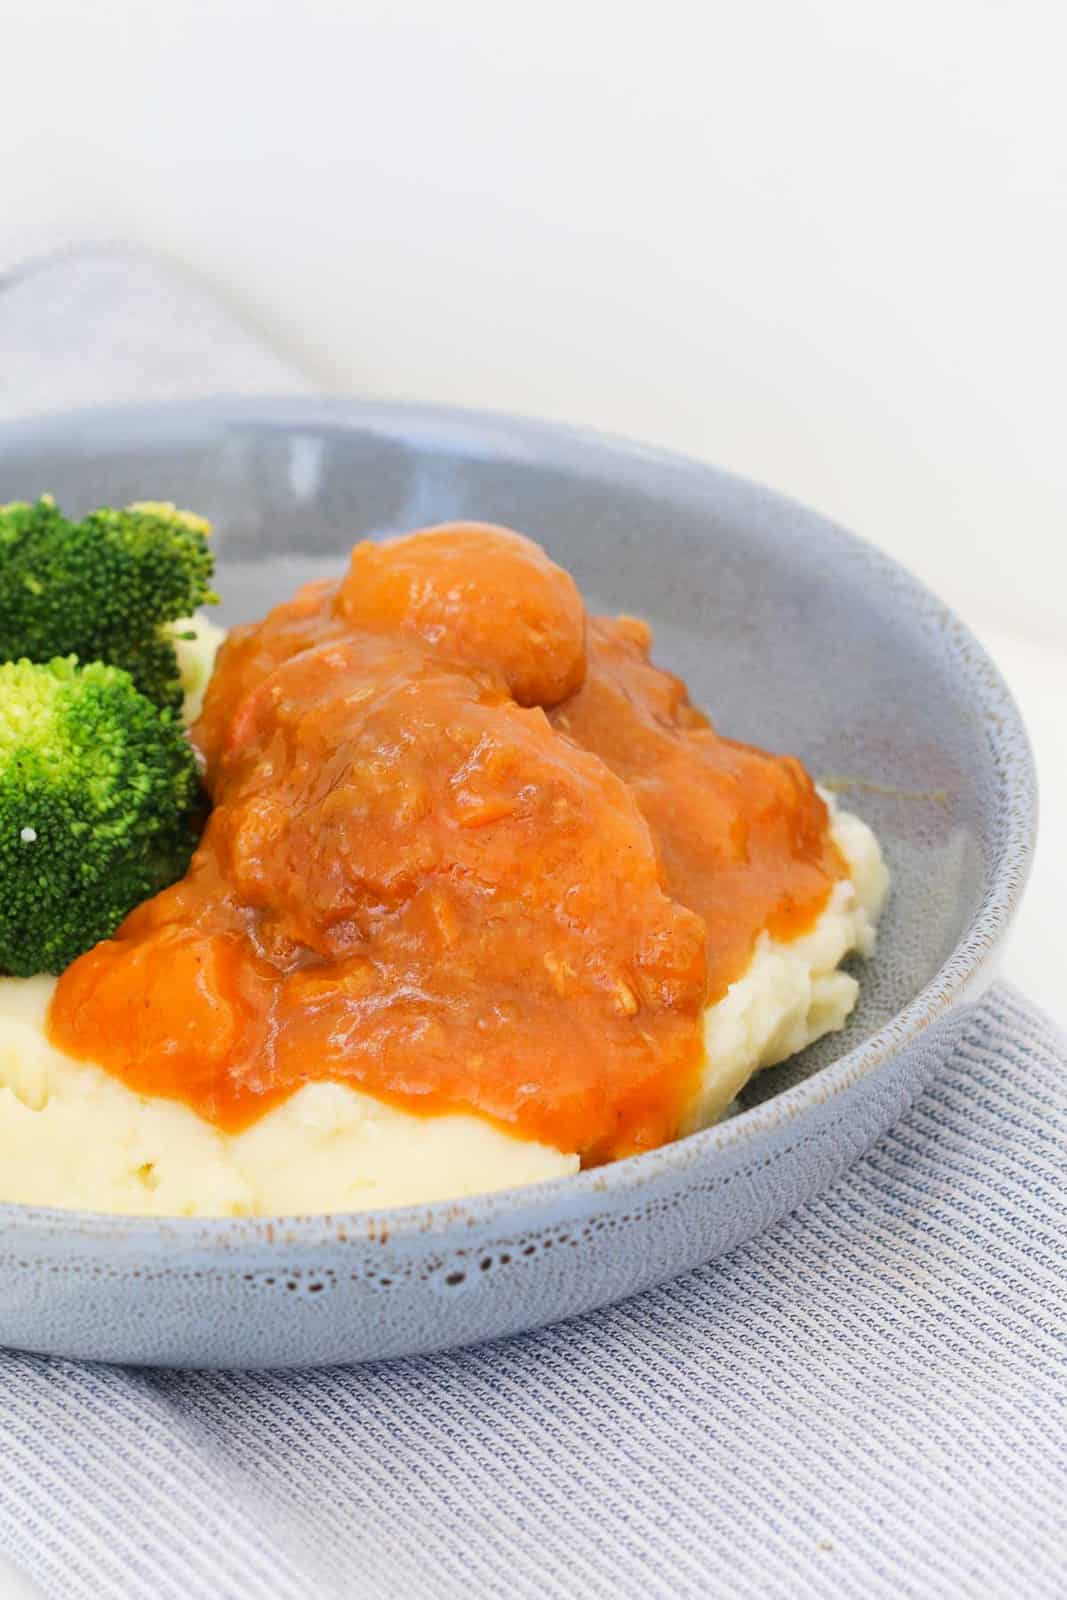 A blue bowl filled with mashed potato, broccoli and chicken covered in apricot sauce.